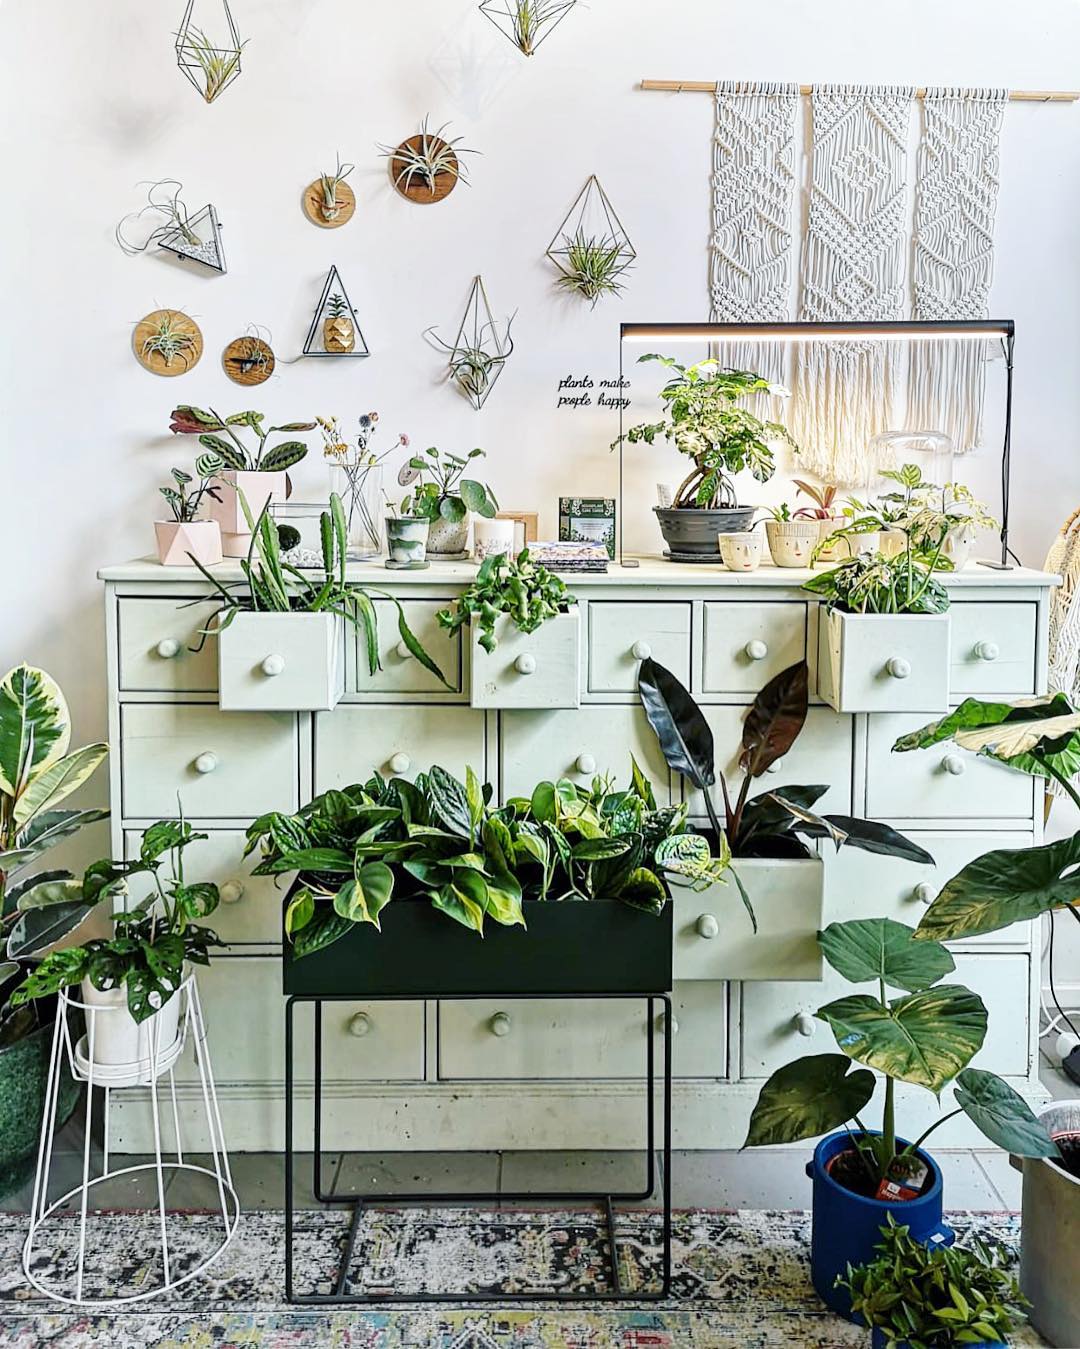 Plant store - the 5 best plant stores in Belgium.